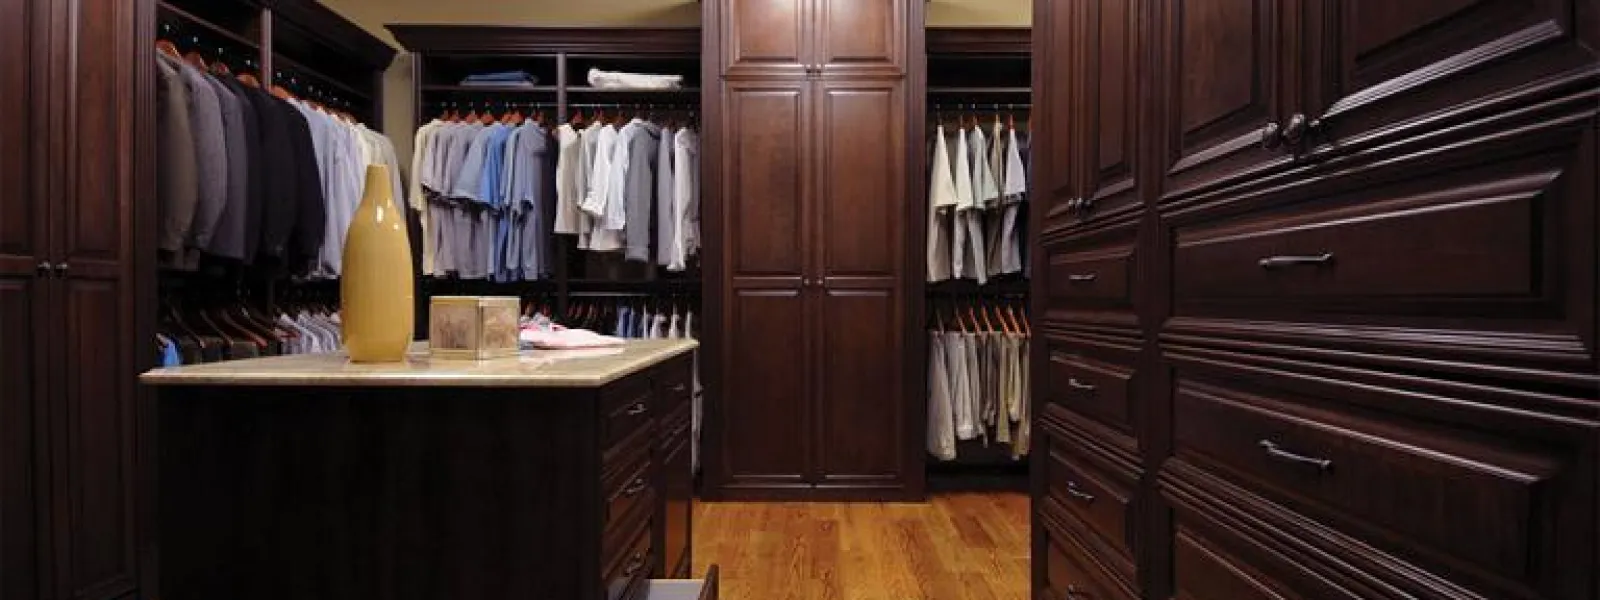 5 Creative Ways to Customize Your Closet Storage Solutions